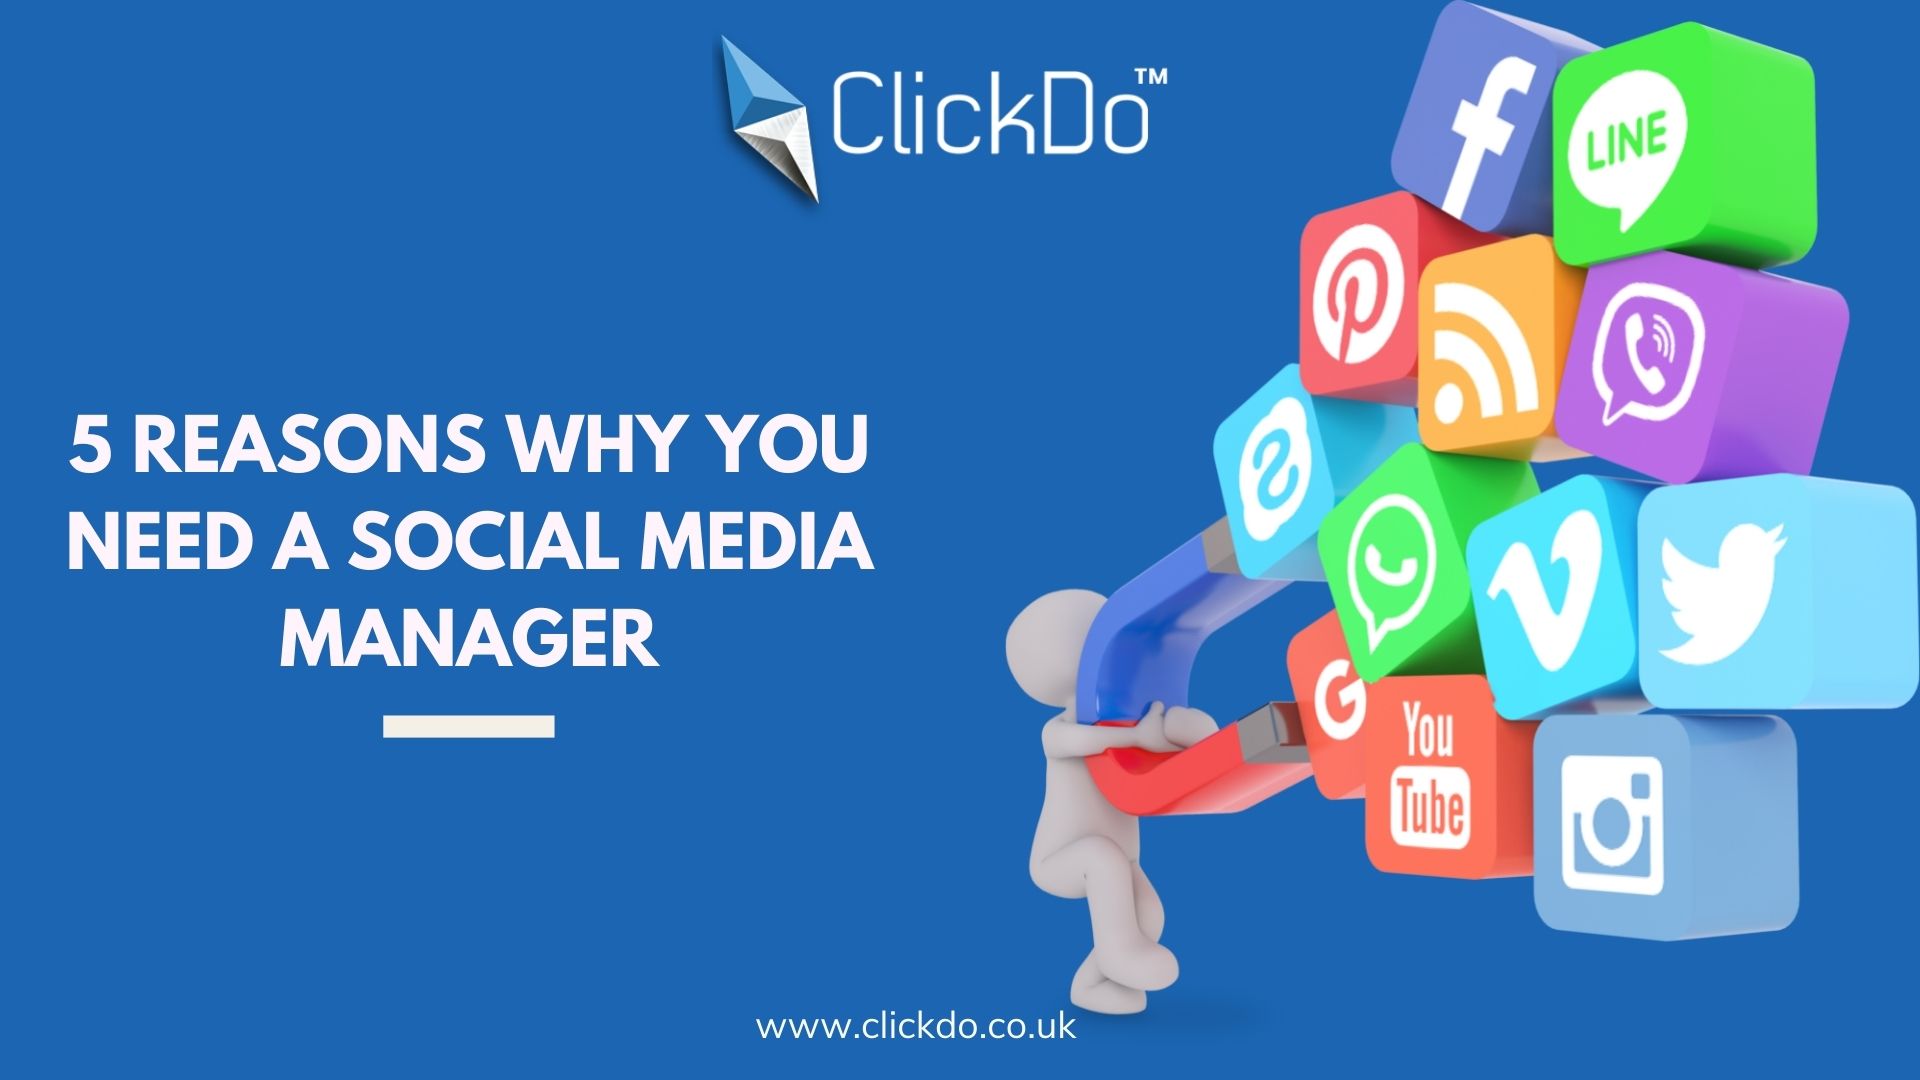 5 Reasons Why you Need a Social Media Manager